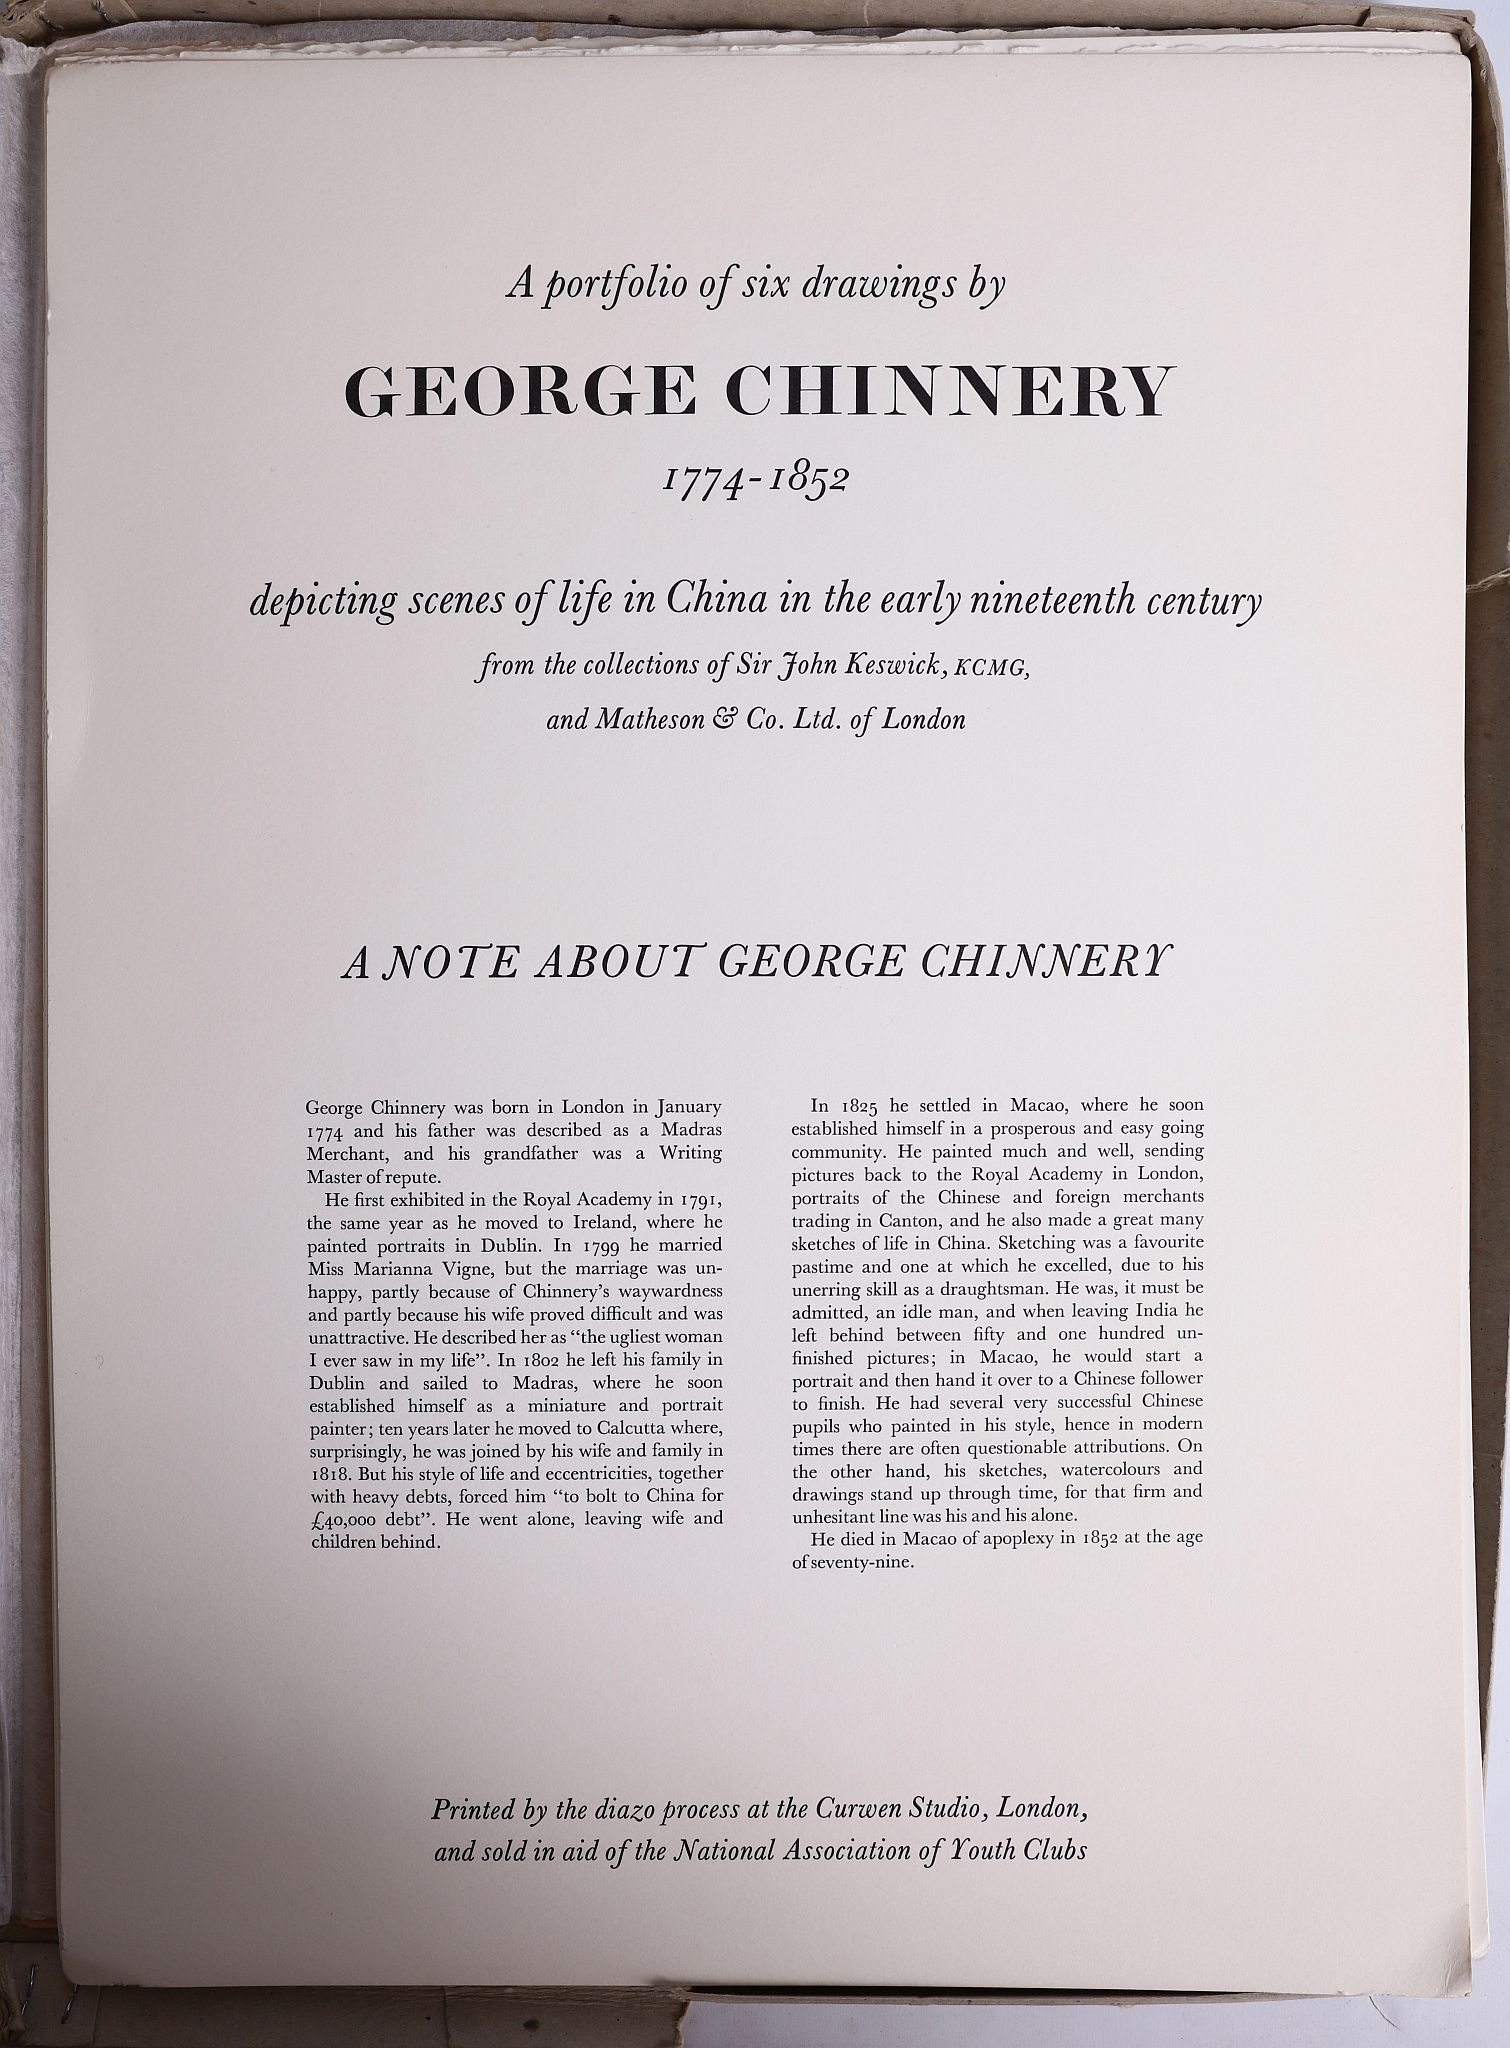 George Chinnery (1774-1852). A fine facsimile portfolio of six drawings of life in China in the